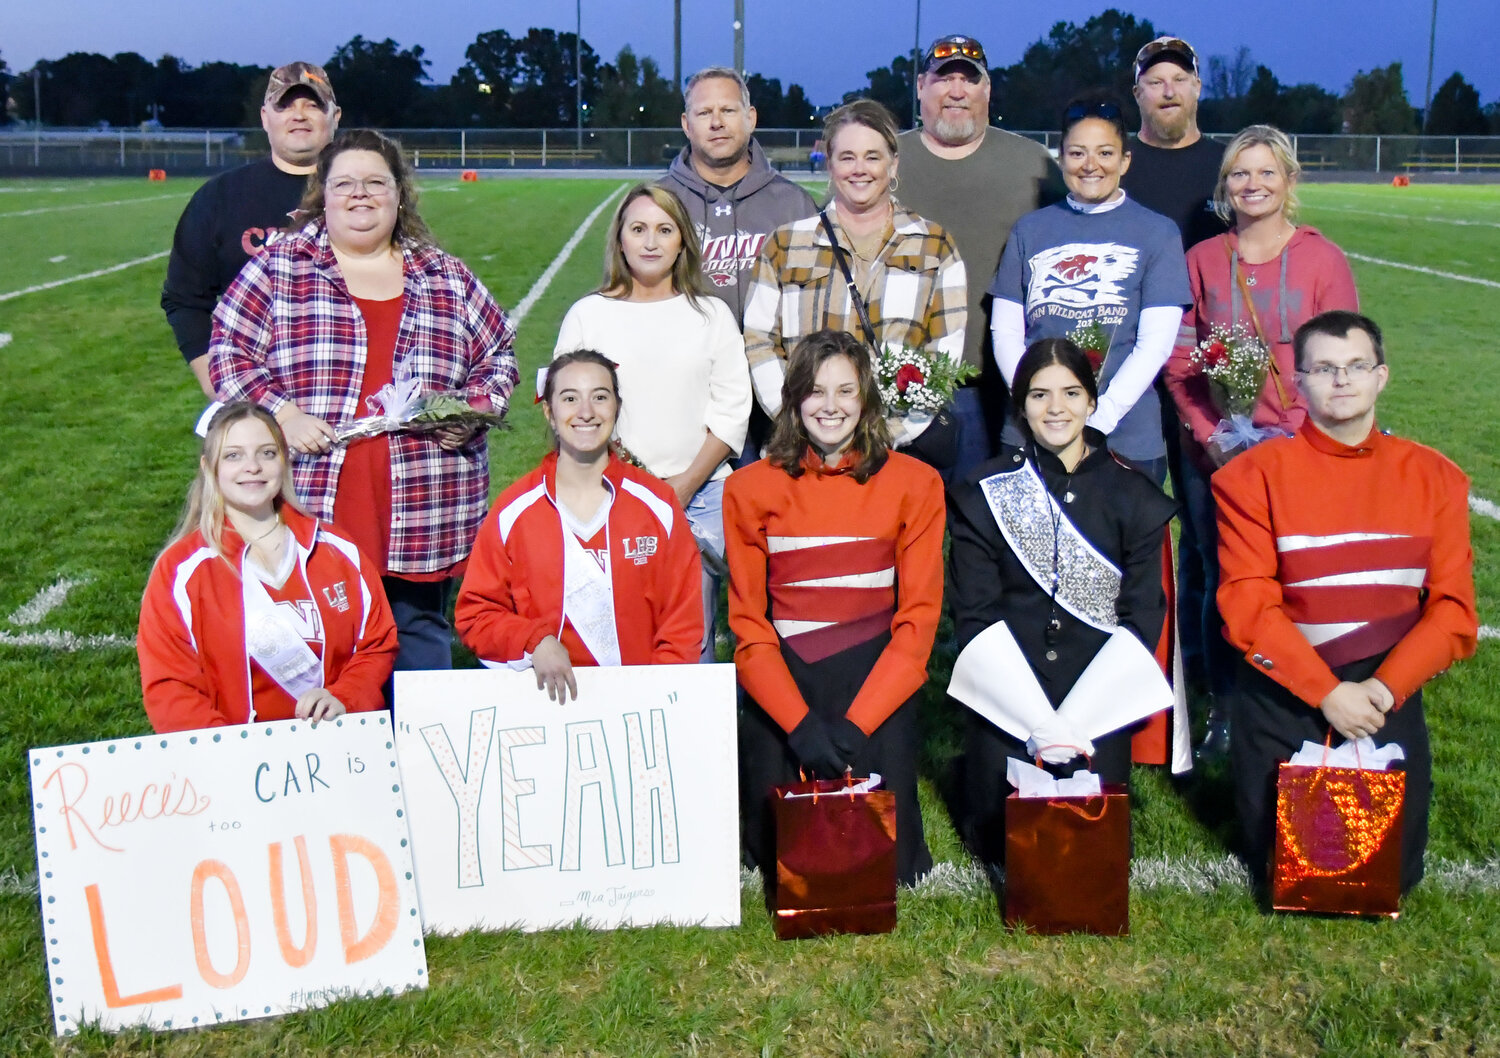 LINN cheer seniors honored at last week’s game against Russellville are Virginia (Reece) Griffith, daughter of Tina and George Griffith, and Mia Jaegers, daughter of Julie and Jason Jaegers. Band seniors are Reagan Klouzek, daughter of Naomi and Perry Klouzek, Natalie Ramsey, daughter of Angel and Shannon Linhardt, and Dylan Wibberg, son of Ron and Heather Wibberg. Not pictured is Aileen Blackburn, daughter of Andrea and Shane Blackburn.
Photo by Jacob Warden